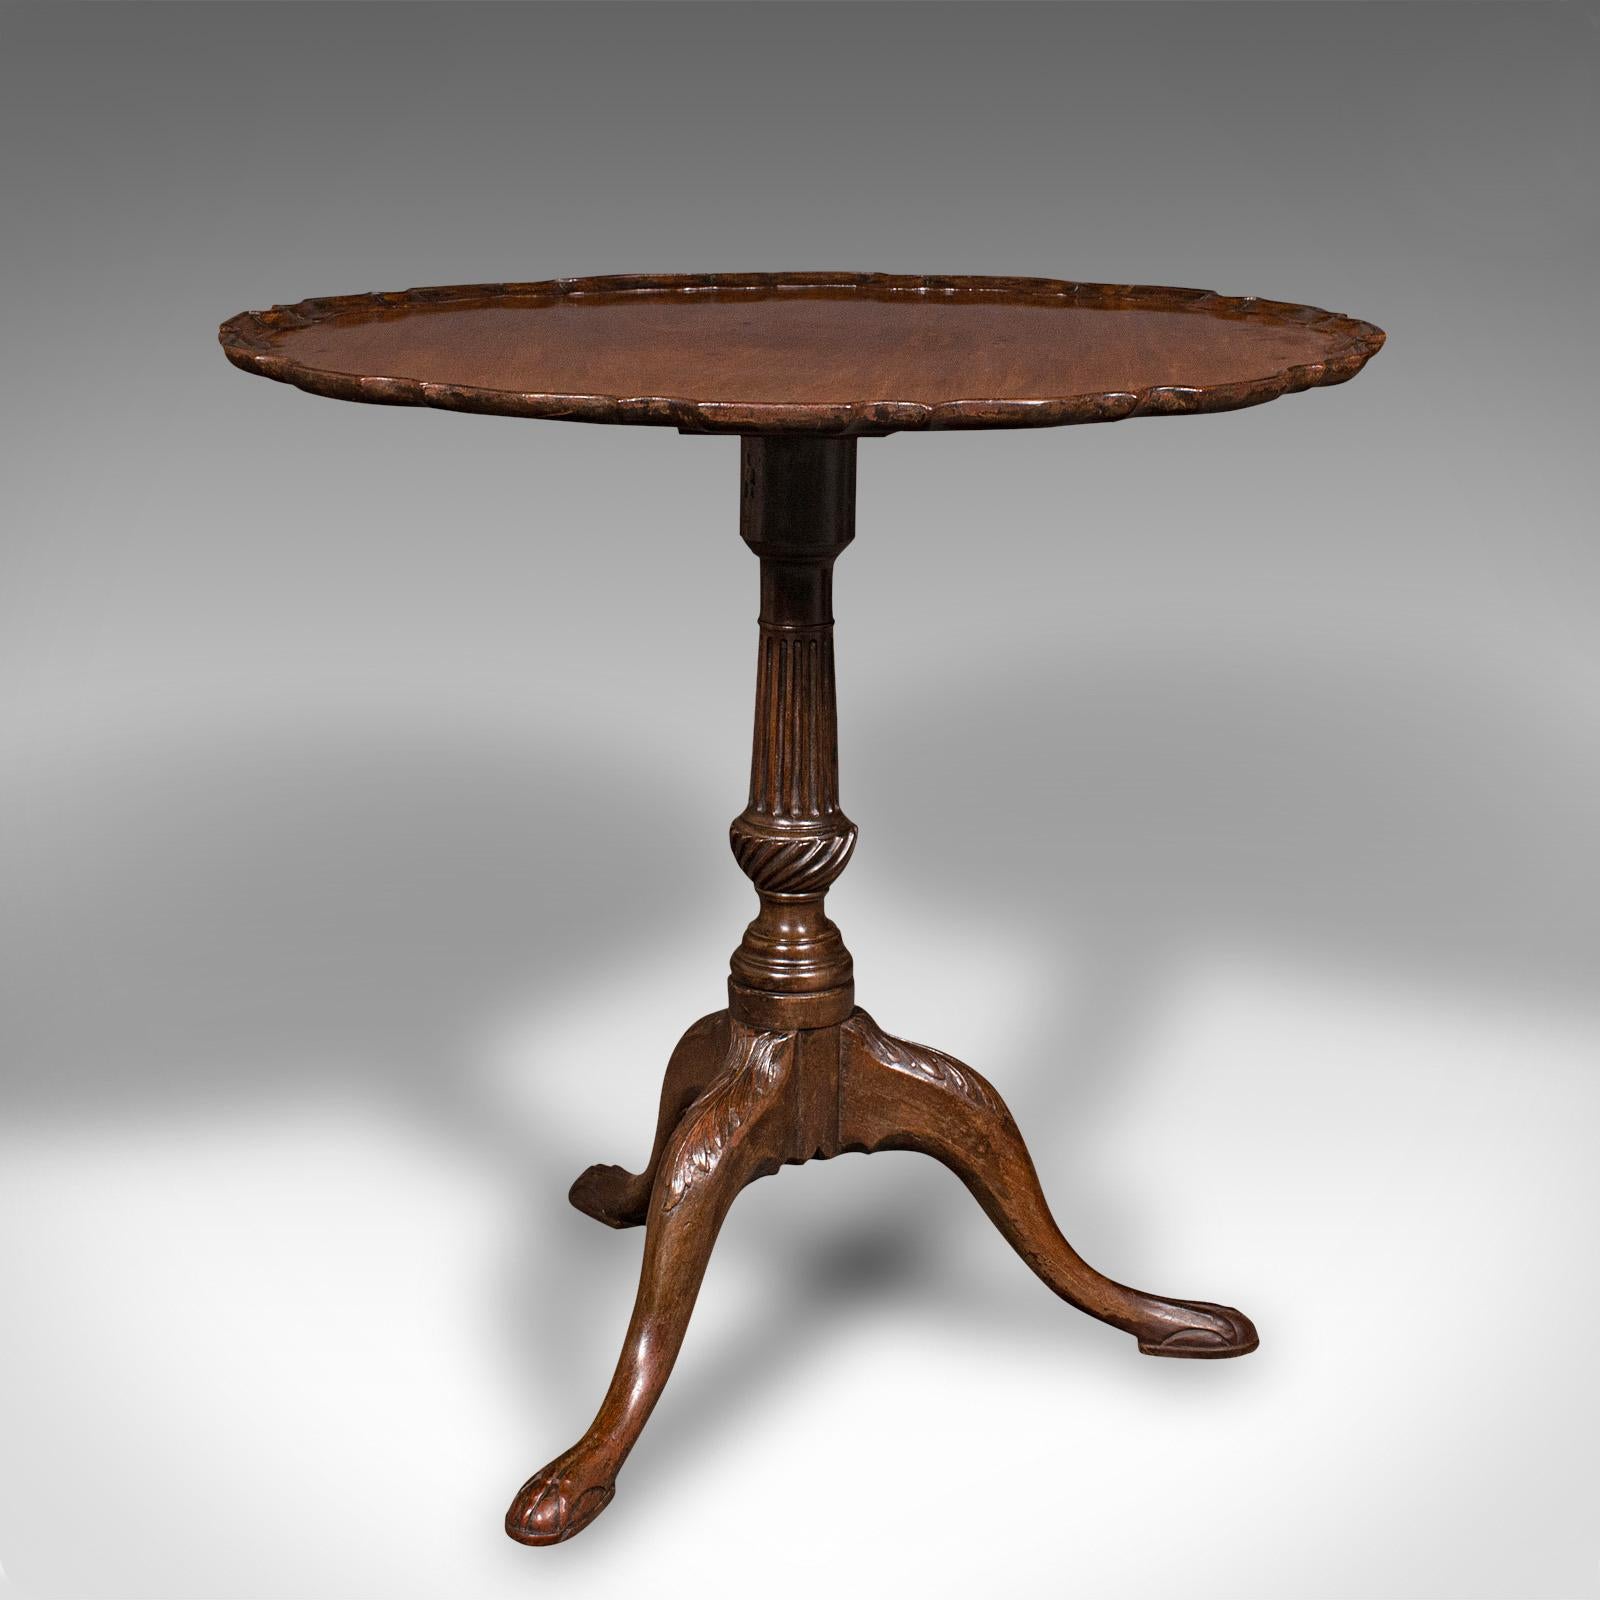 Wood Antique Pie Crust Lamp Table, English, Tilt Top, Occasional, Victorian, C.1870 For Sale